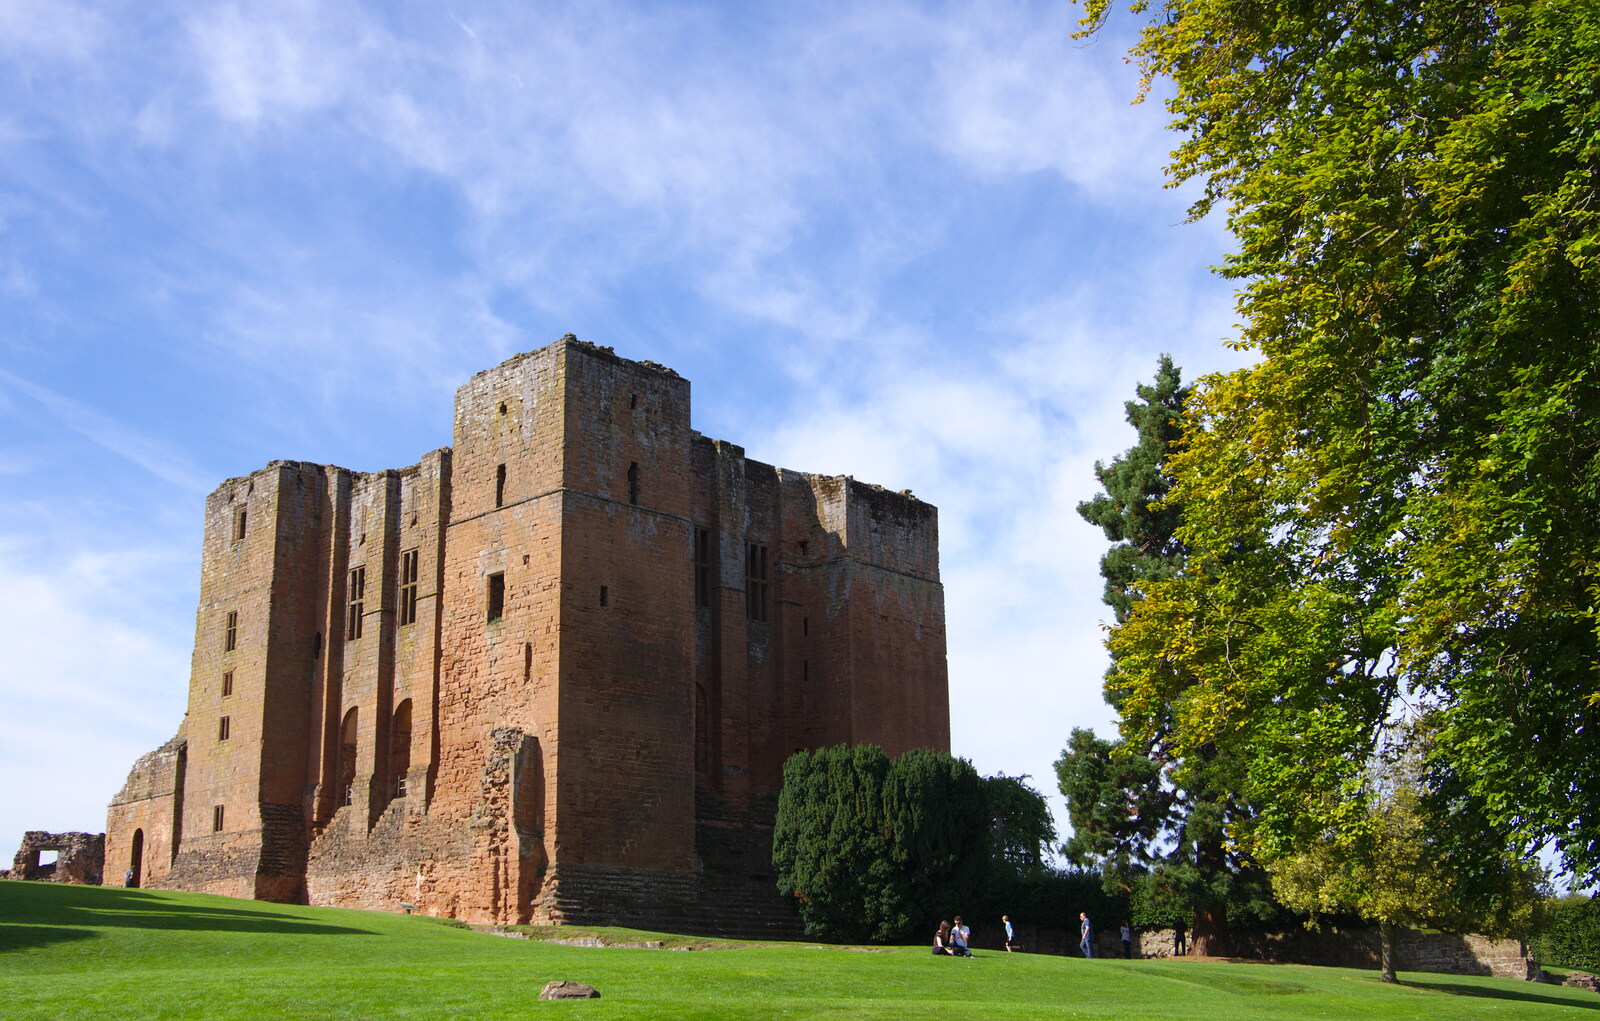 The original castle keep from Kenilworth Castle and the 69th Entry Reunion Dinner, Stratford, Warwickshire - 14th September 2019